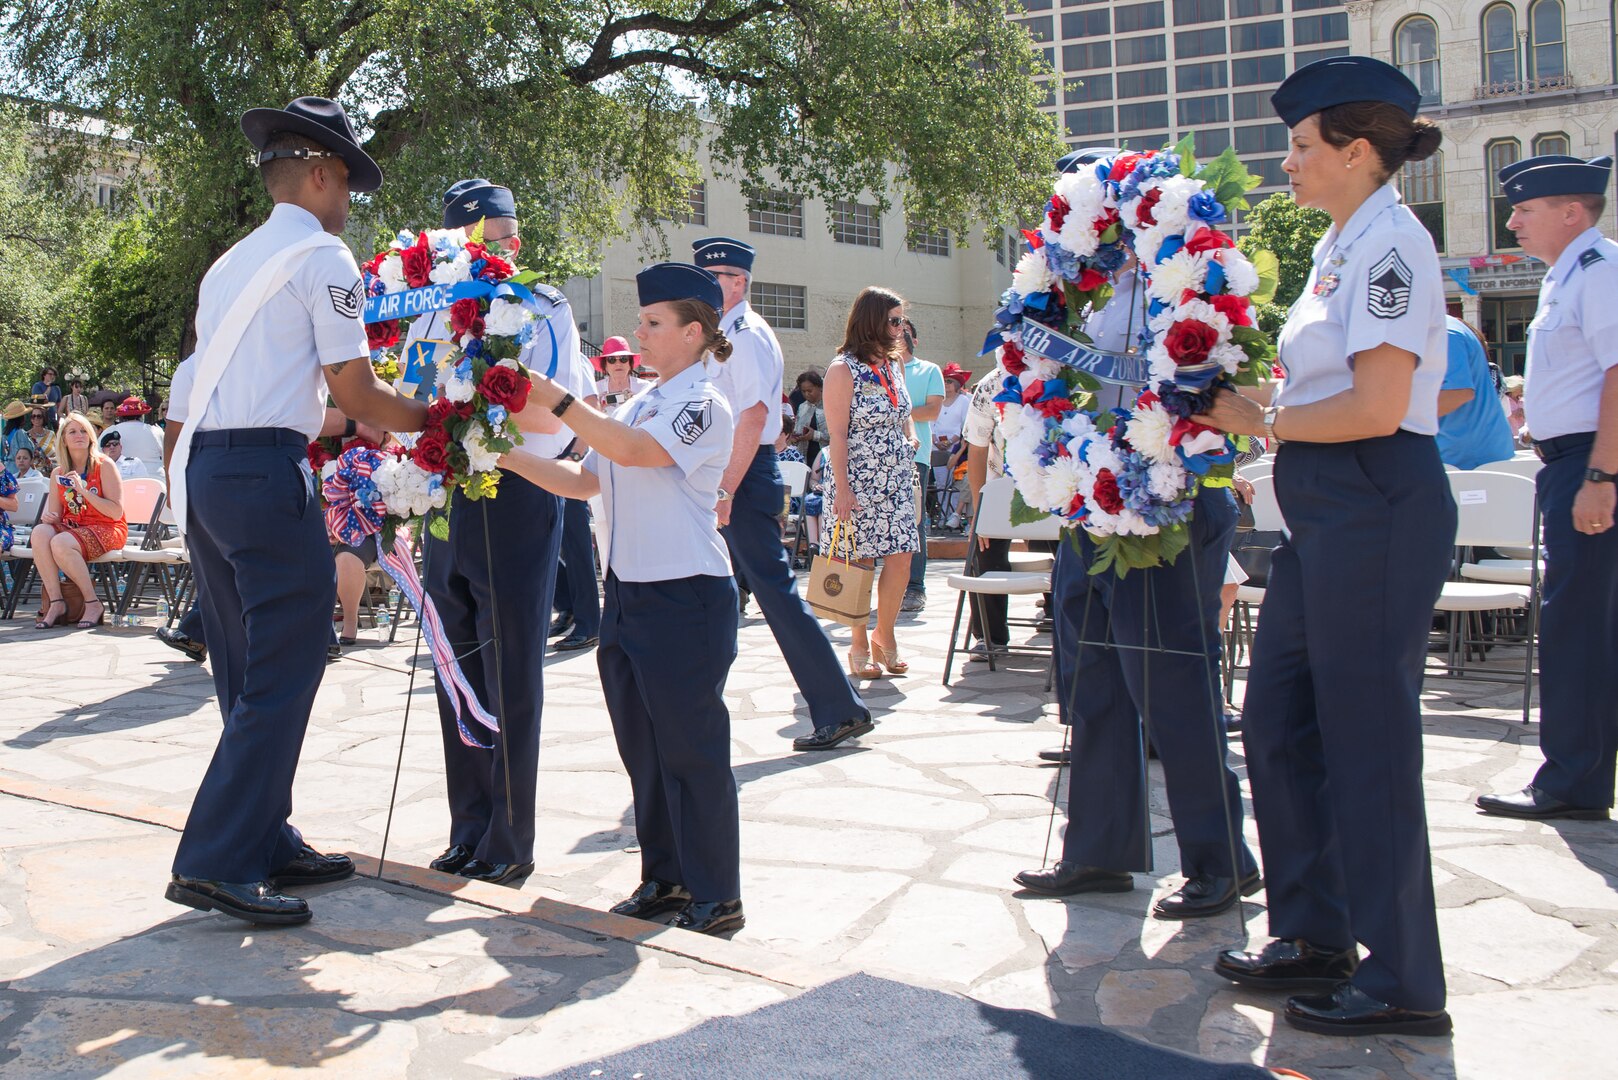 Airmen from Joint Base San Antonio place memorial wreaths during the 2017 Pilgrimage to the Alamo as part of Fiesta San Antonio April 24, 2017. The Pilgrimage to the Alamo includes a march through downtown San Antonio and ends with a wreath laying ceremony in honor of those who fought in the Battles of the Alamo and San Jacinto. Servicemembers from around JBSA participate in Fiesta San Antonio activities representing the progression of the United States military. (U.S. Air Force photo by Andrew Patterson)